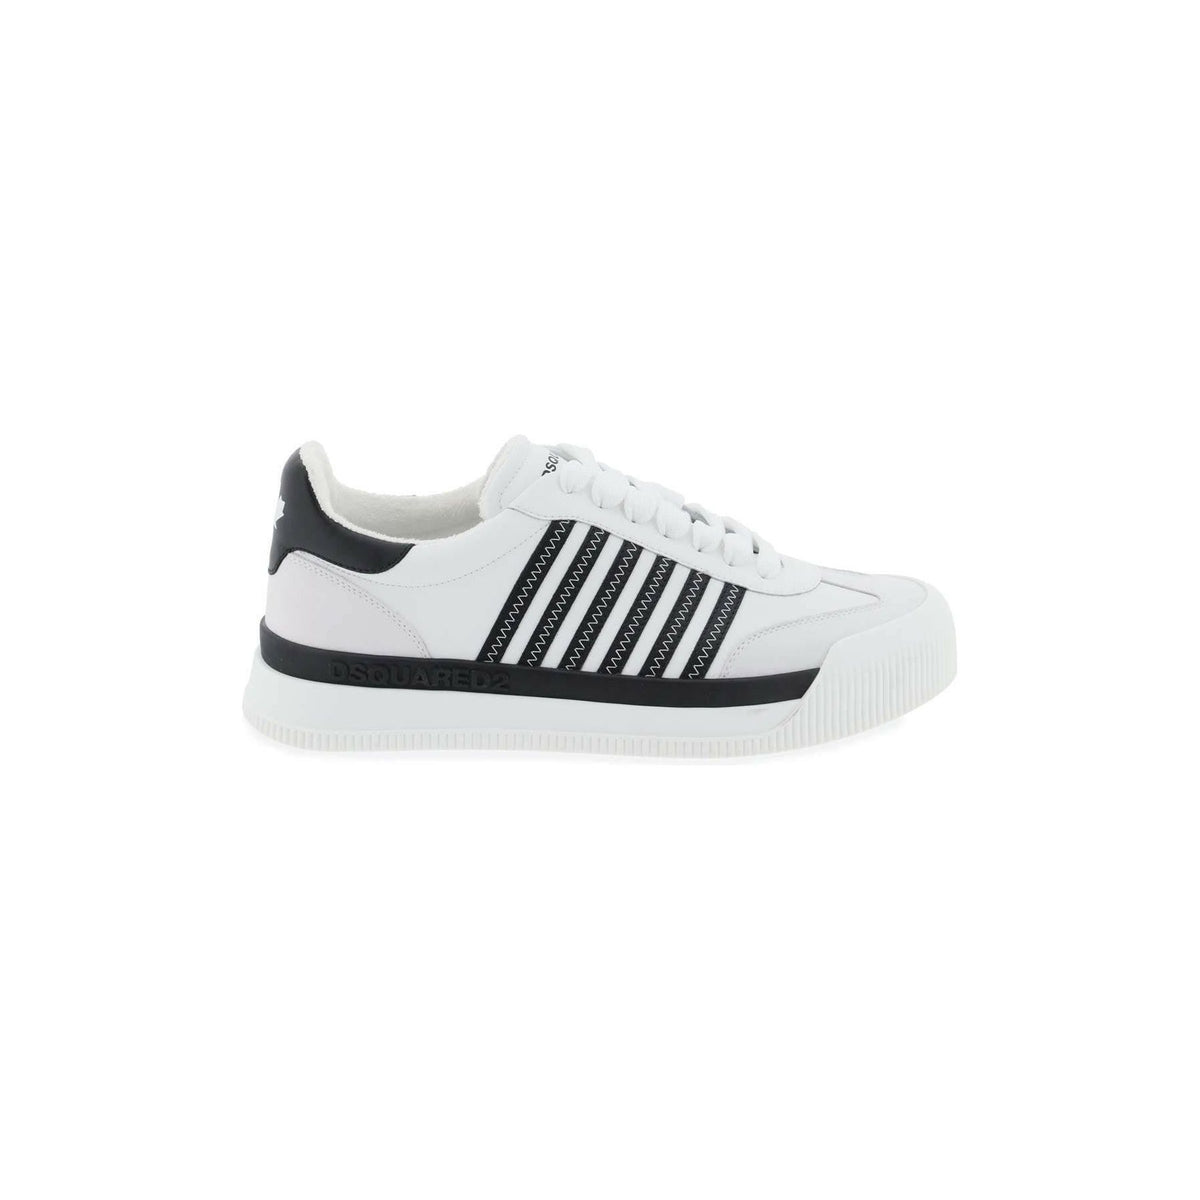 White Black Leather New Jersey Sneakers With Contrasting Stripes DSQUARED2 JOHN JULIA.